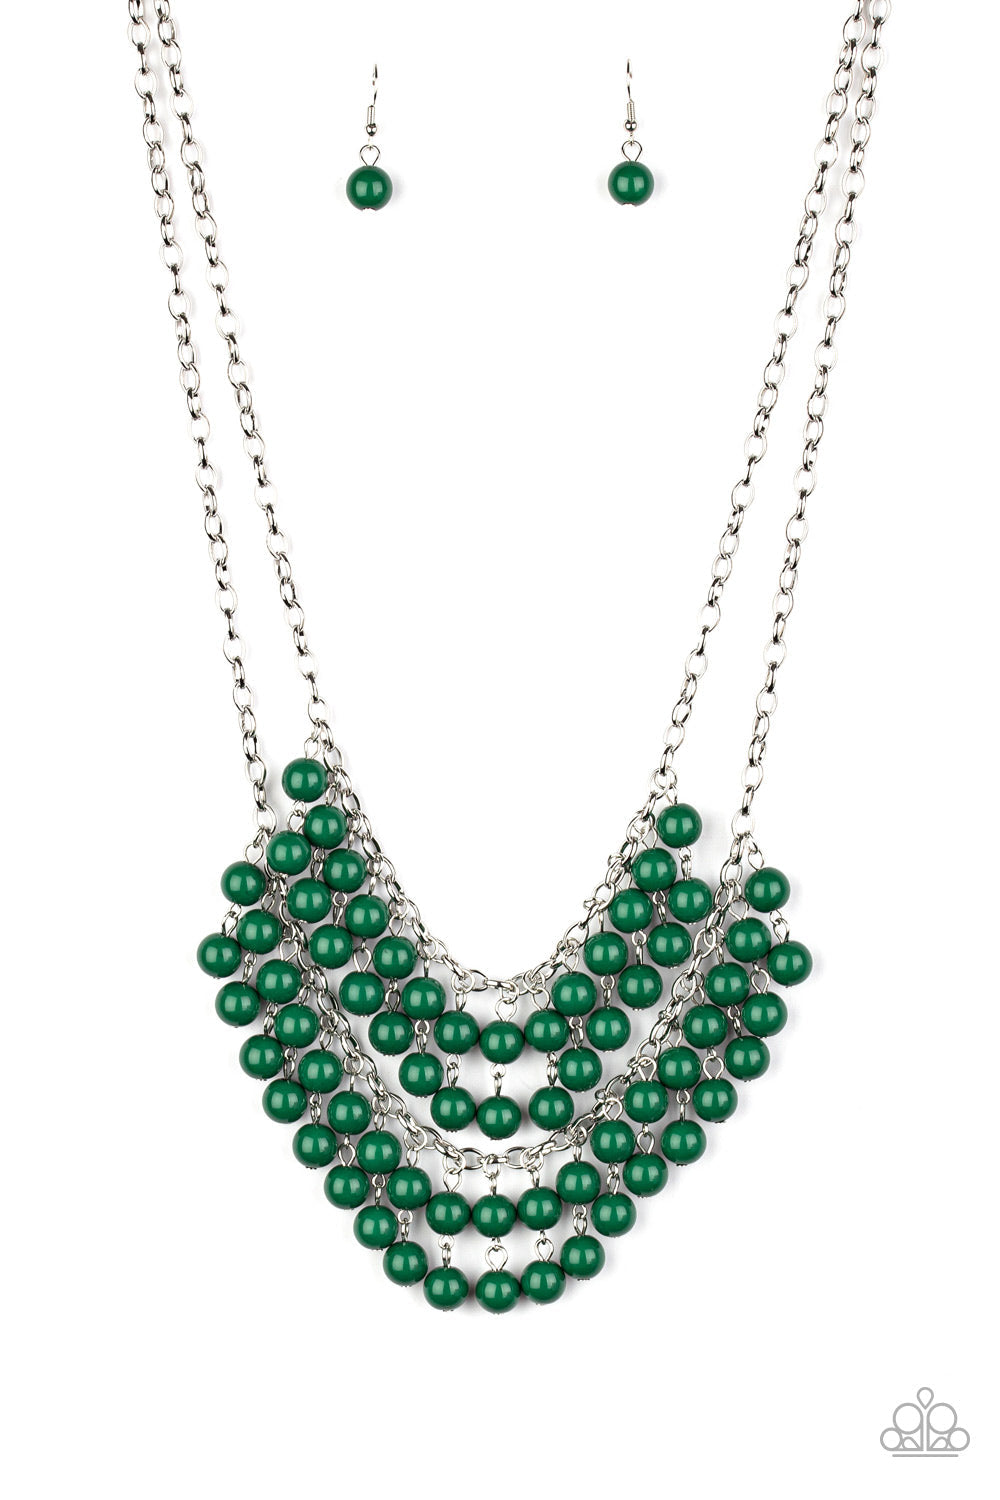 Bubbly Boardwalk - Green and Silver Necklace - Paparazzi Accessories - Pairs of green beads cascade from the bottoms of two silver chains, creating a vivaciously layered fringe below the collar. Features an adjustable clasp closure. Sold as one individual necklace.